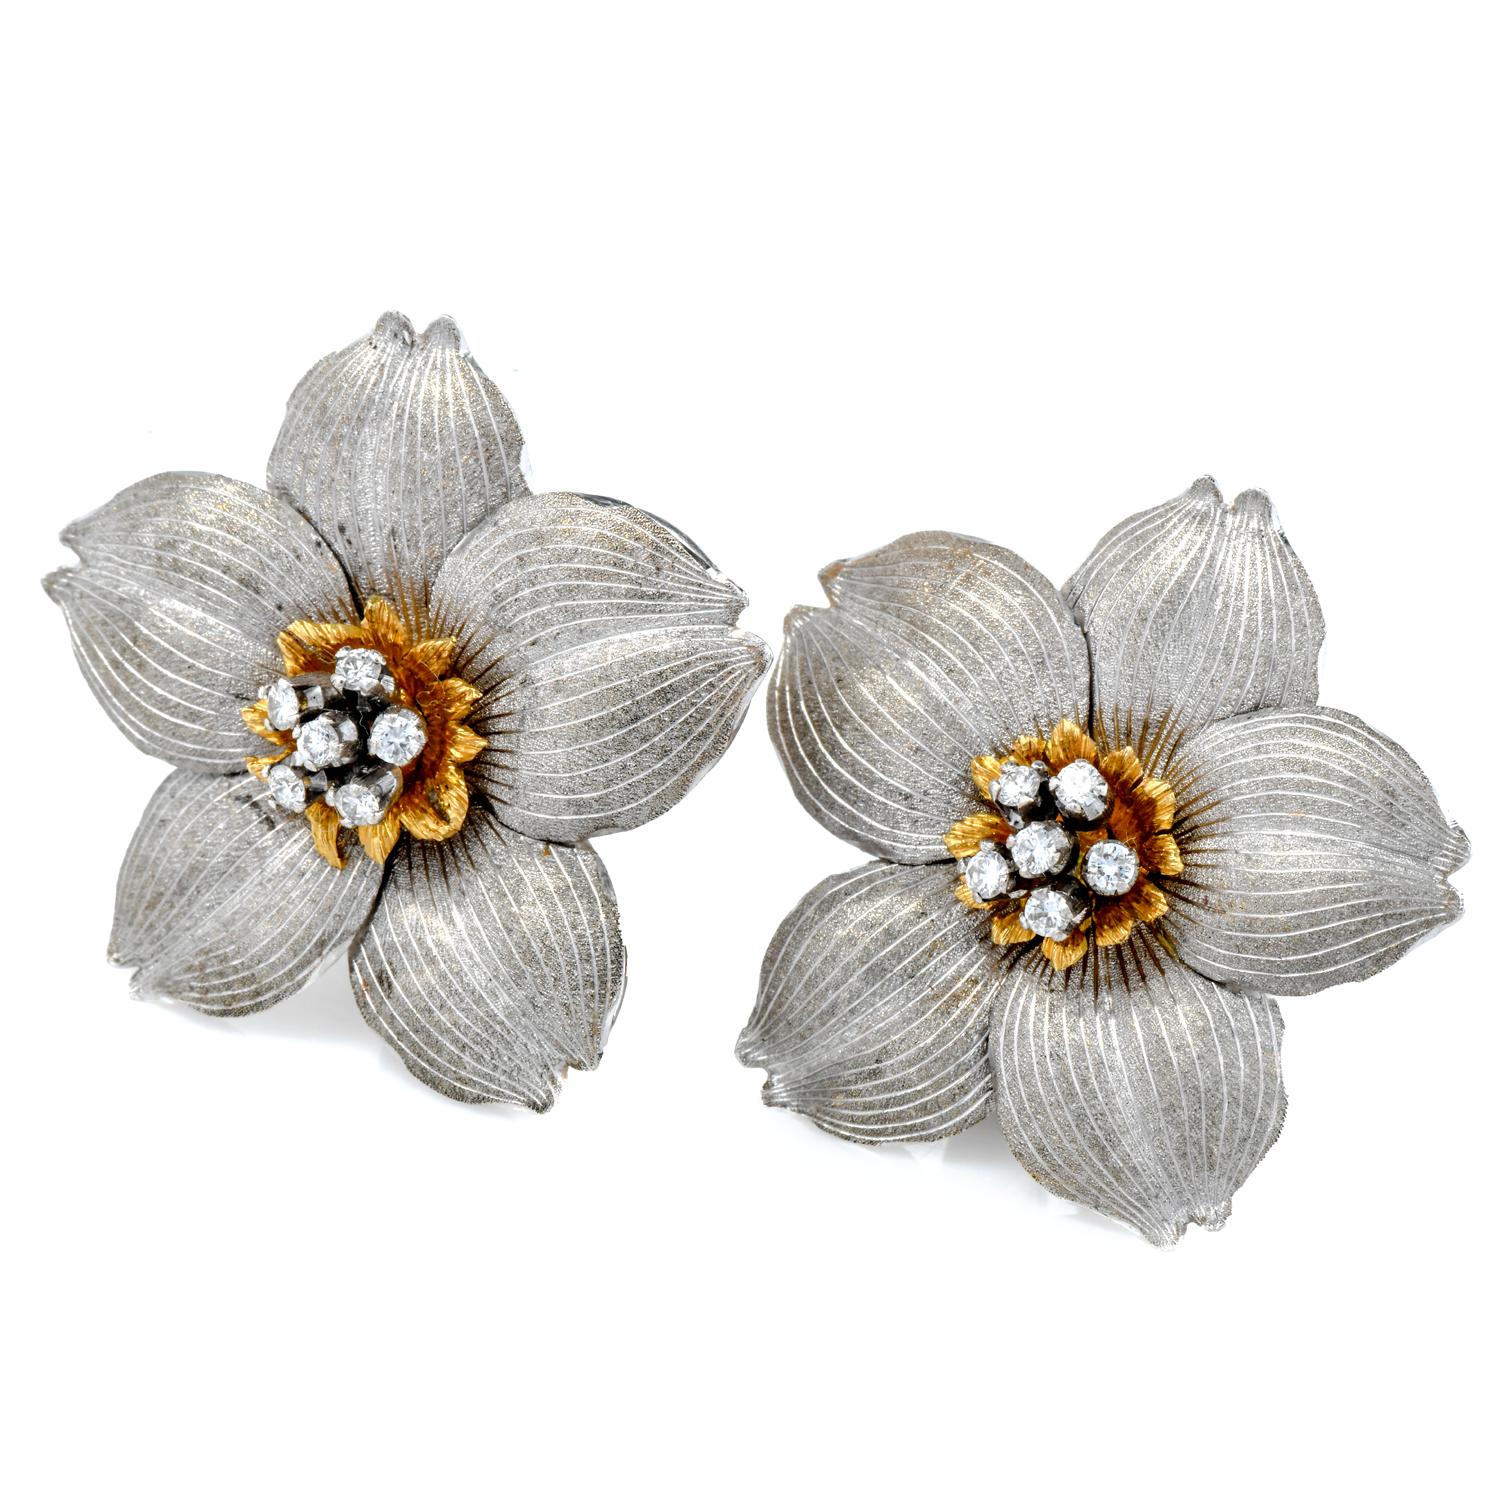 These elegant Buccellati Flower Motif earrings are crafted in a combination of 18K Yellow & 18K White gold.

These Italian clip-on earrings are centered by (12) Round Cut Genuine Diamonds, measuring collectively 0.25 carats and G-H color & VS